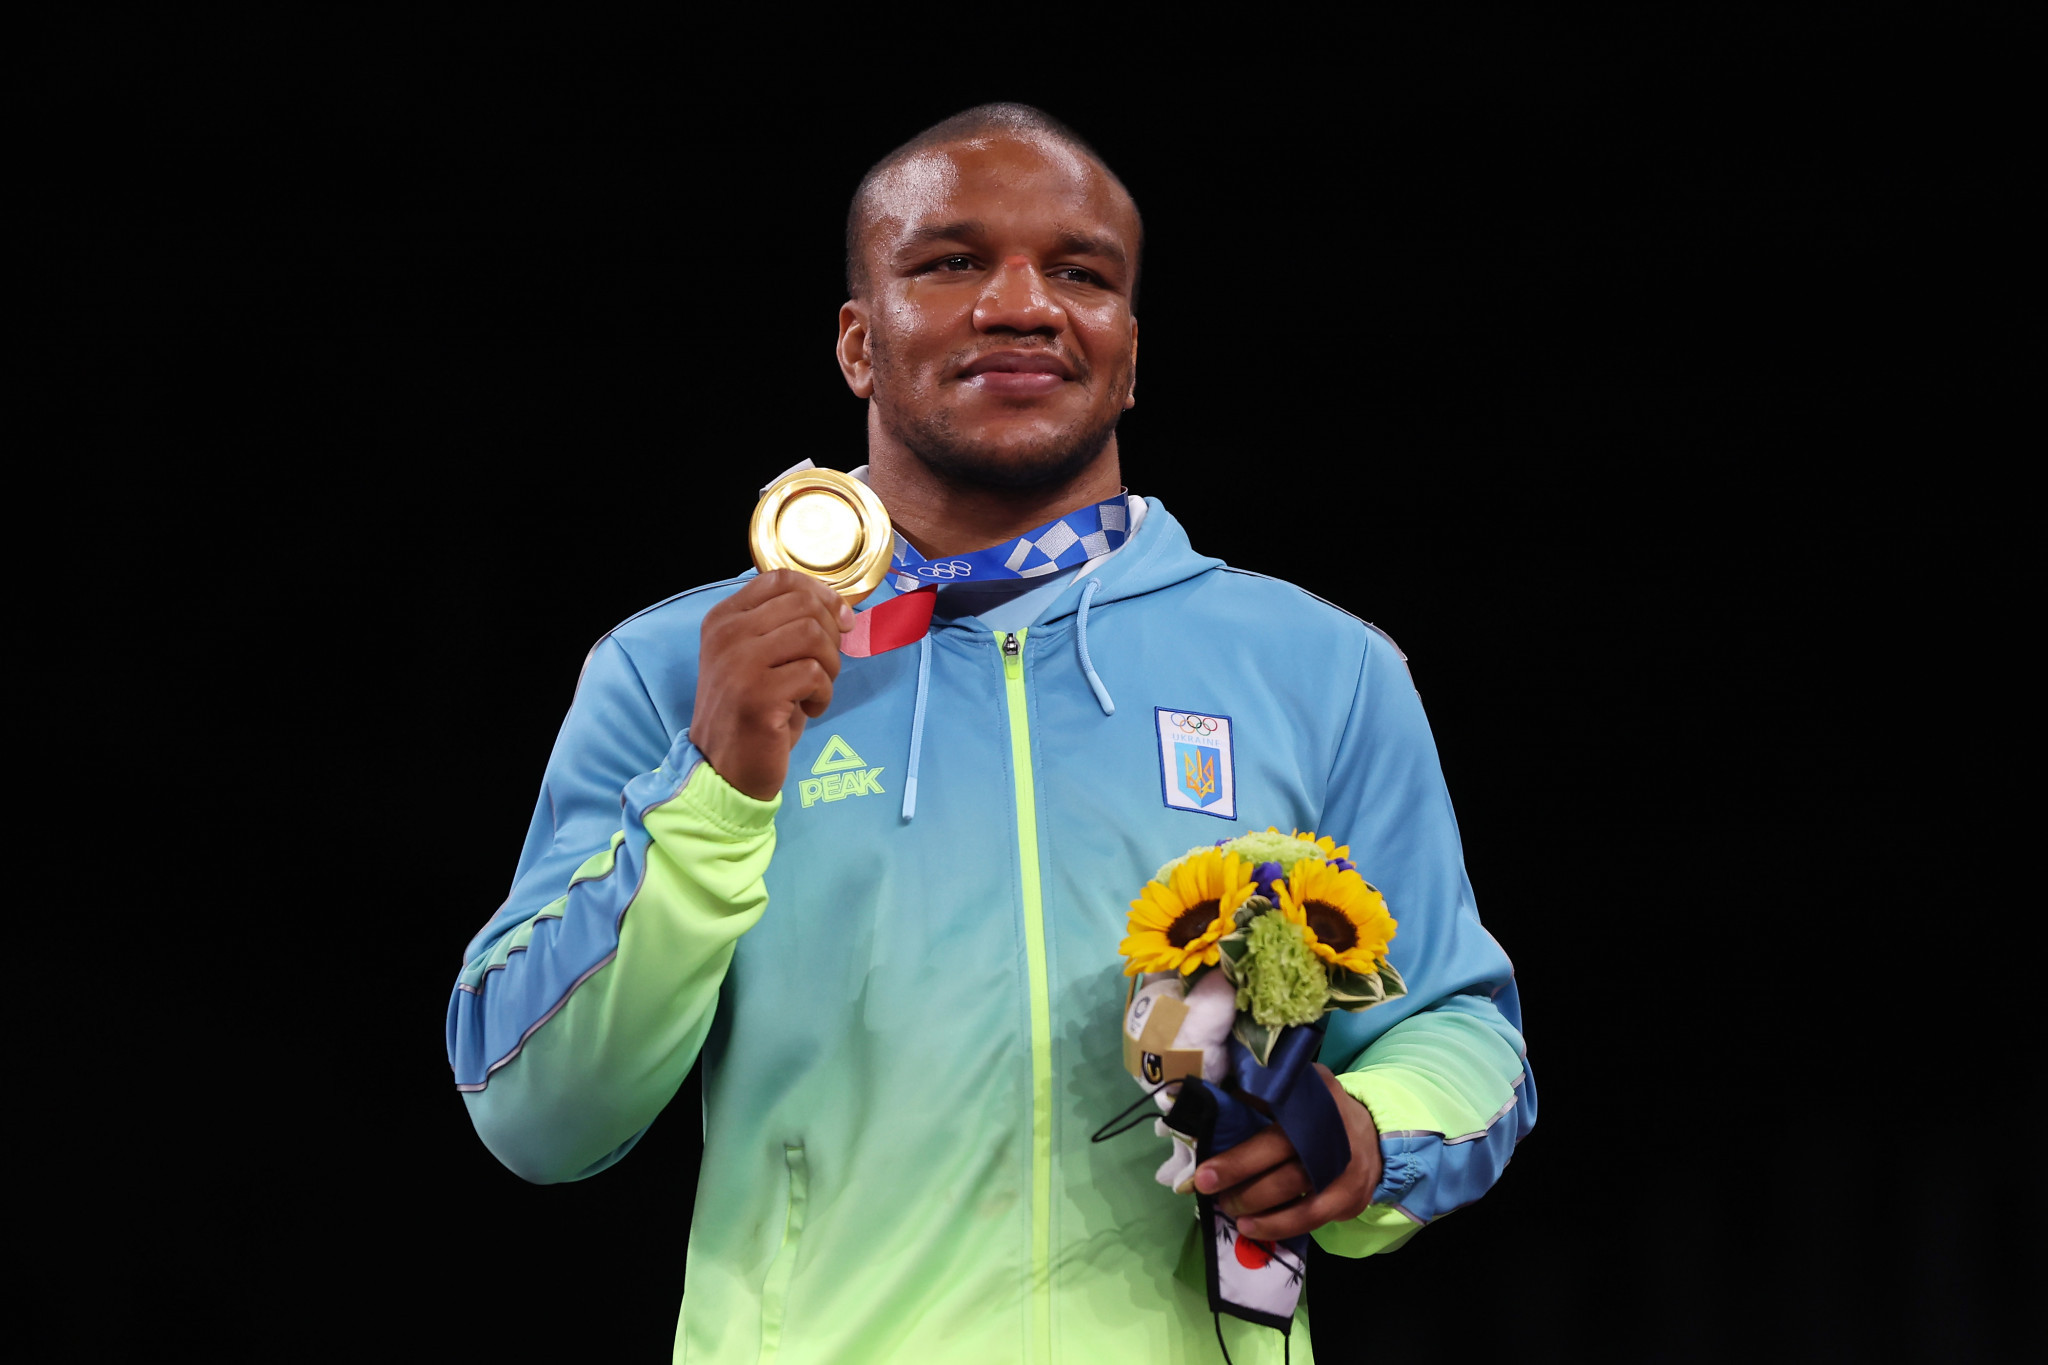 Zhan Beleniuk won gold for Ukraine in the under-87kg Greco-Roman division at Tokyo 2020 ©Getty Images